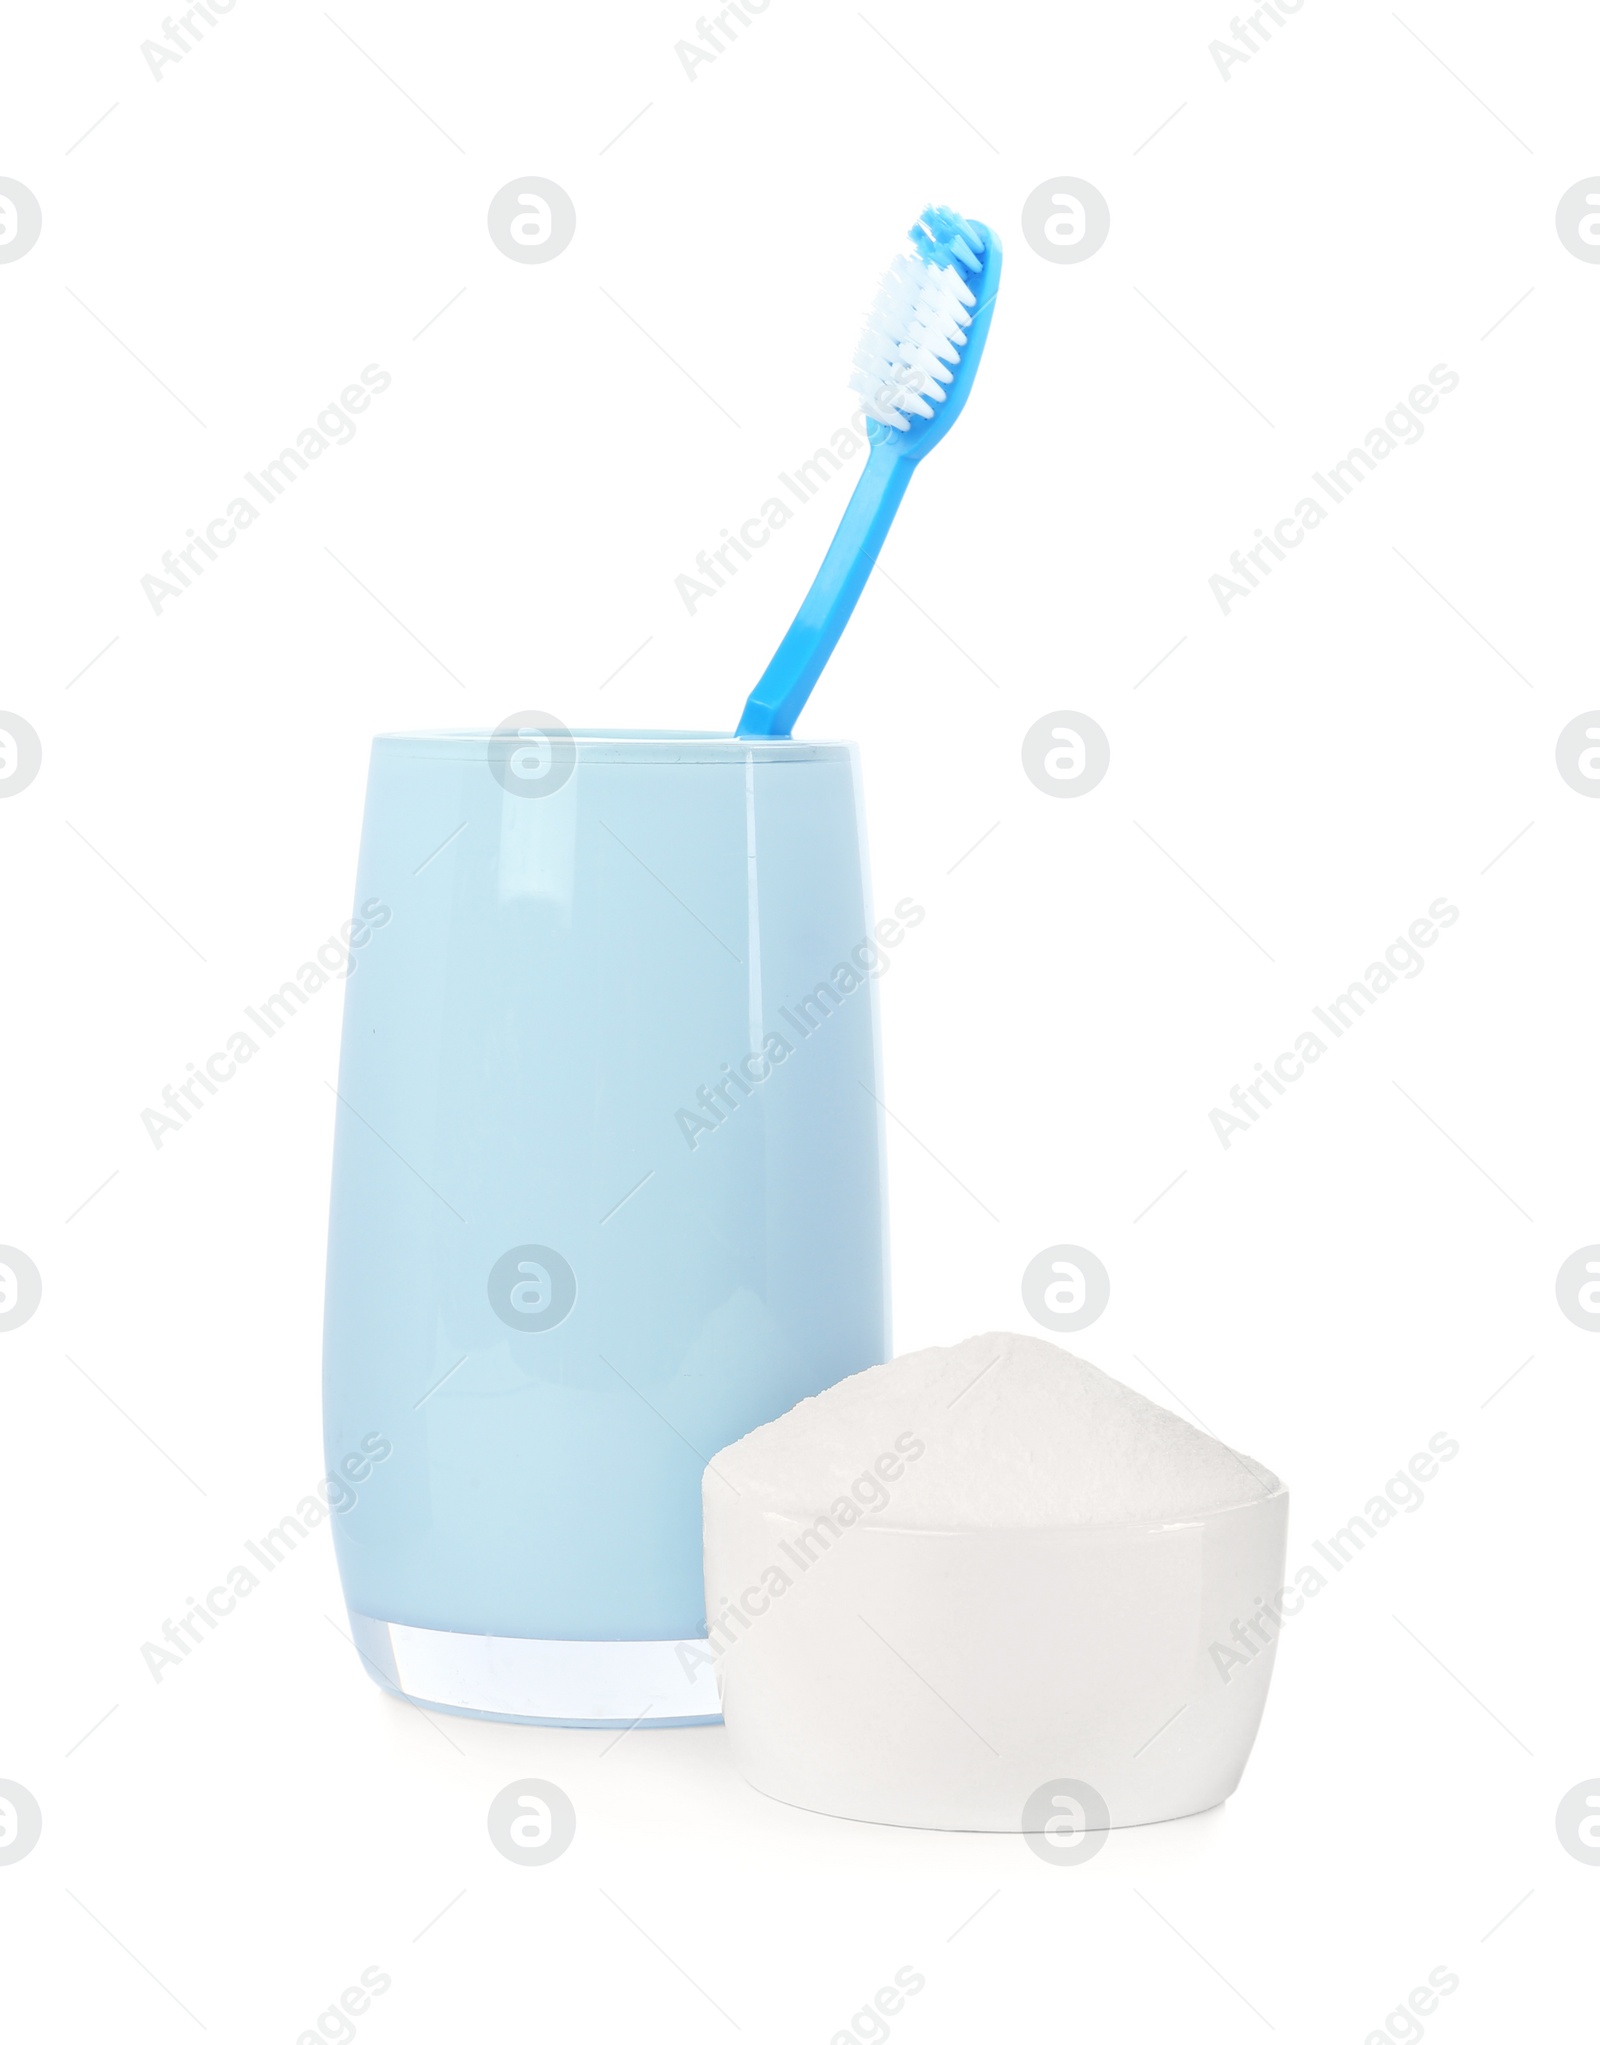 Photo of Toothbrush in holder and bowl with baking soda on white background